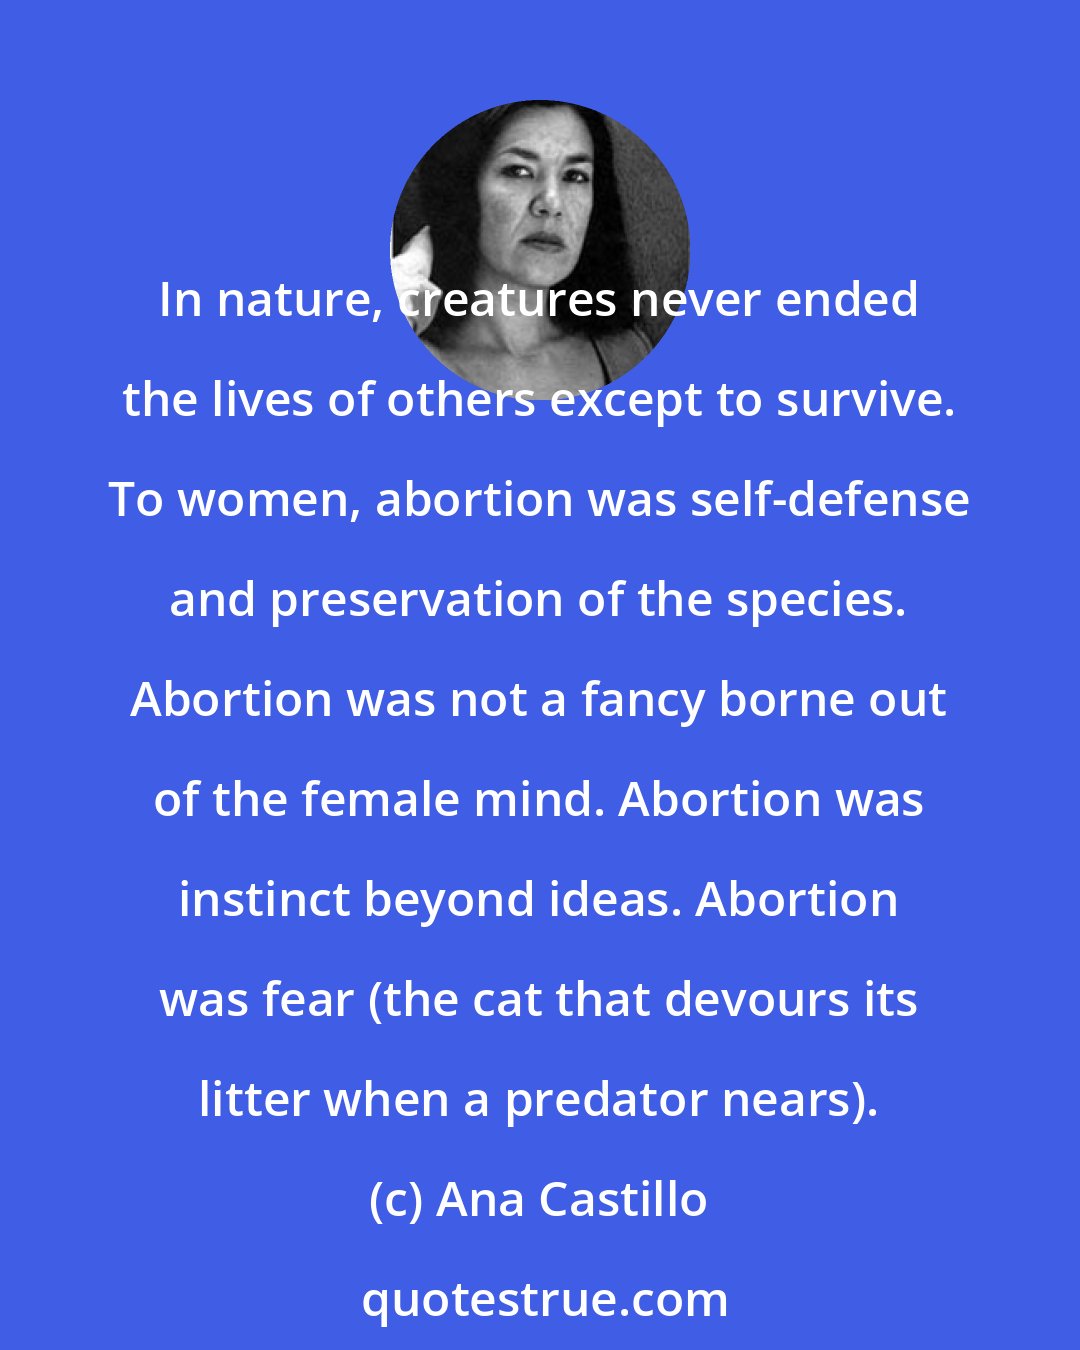 Ana Castillo: In nature, creatures never ended the lives of others except to survive. To women, abortion was self-defense and preservation of the species. Abortion was not a fancy borne out of the female mind. Abortion was instinct beyond ideas. Abortion was fear (the cat that devours its litter when a predator nears).